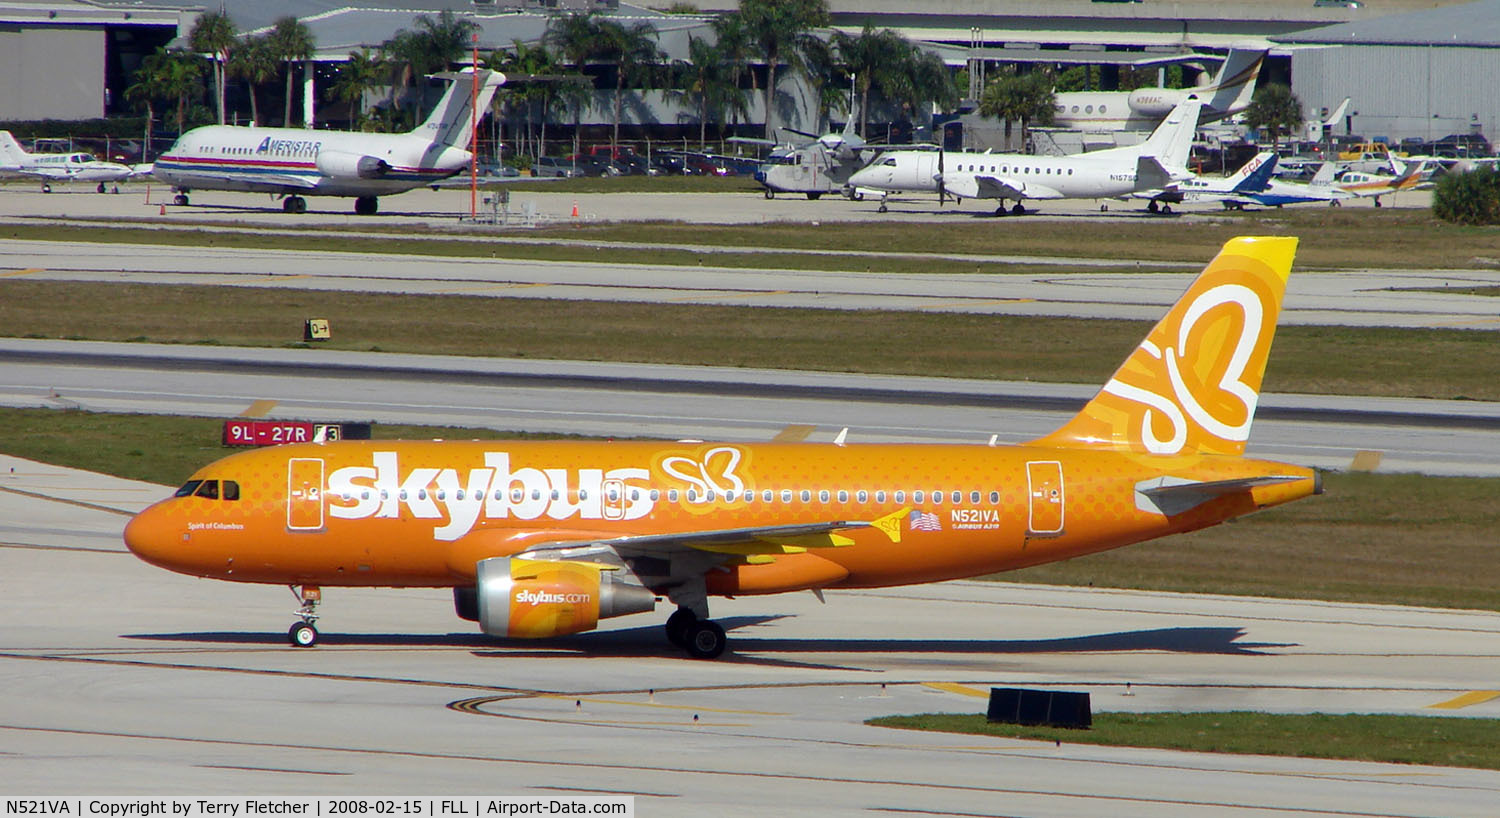 N521VA, 2006 Airbus A319-112 C/N 2773, Skybus is now operating one of the A319 that was ordered by Virgin America